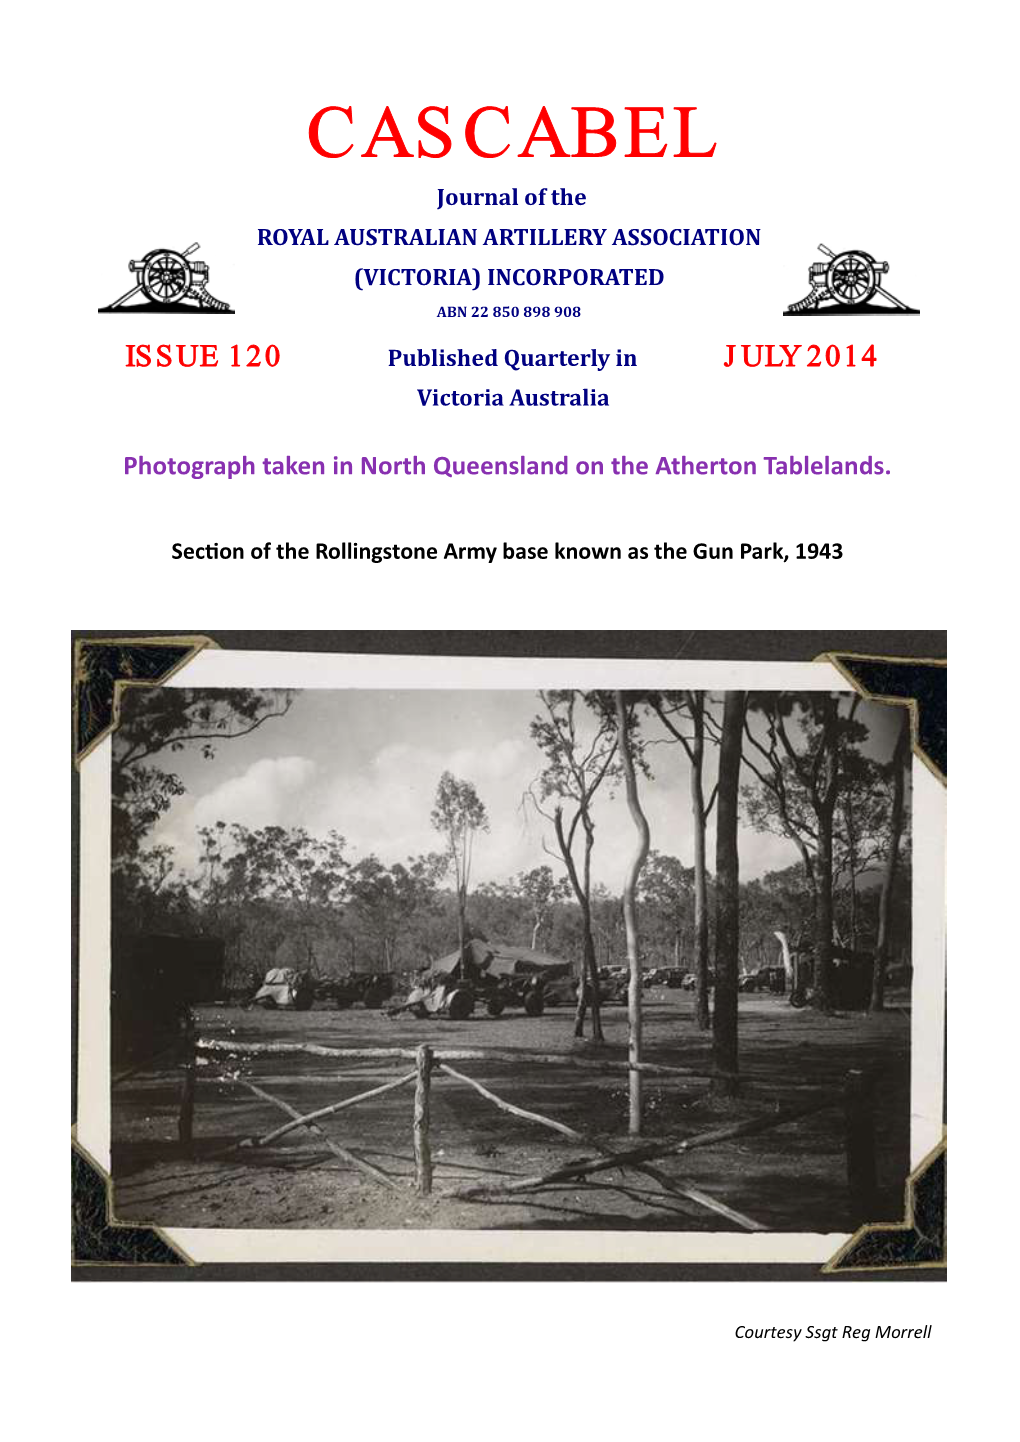 CASCABEL Journal of the ROYAL AUSTRALIAN ARTILLERY ASSOCIATION (VICTORIA) INCORPORATED ABN 22 850 898 908